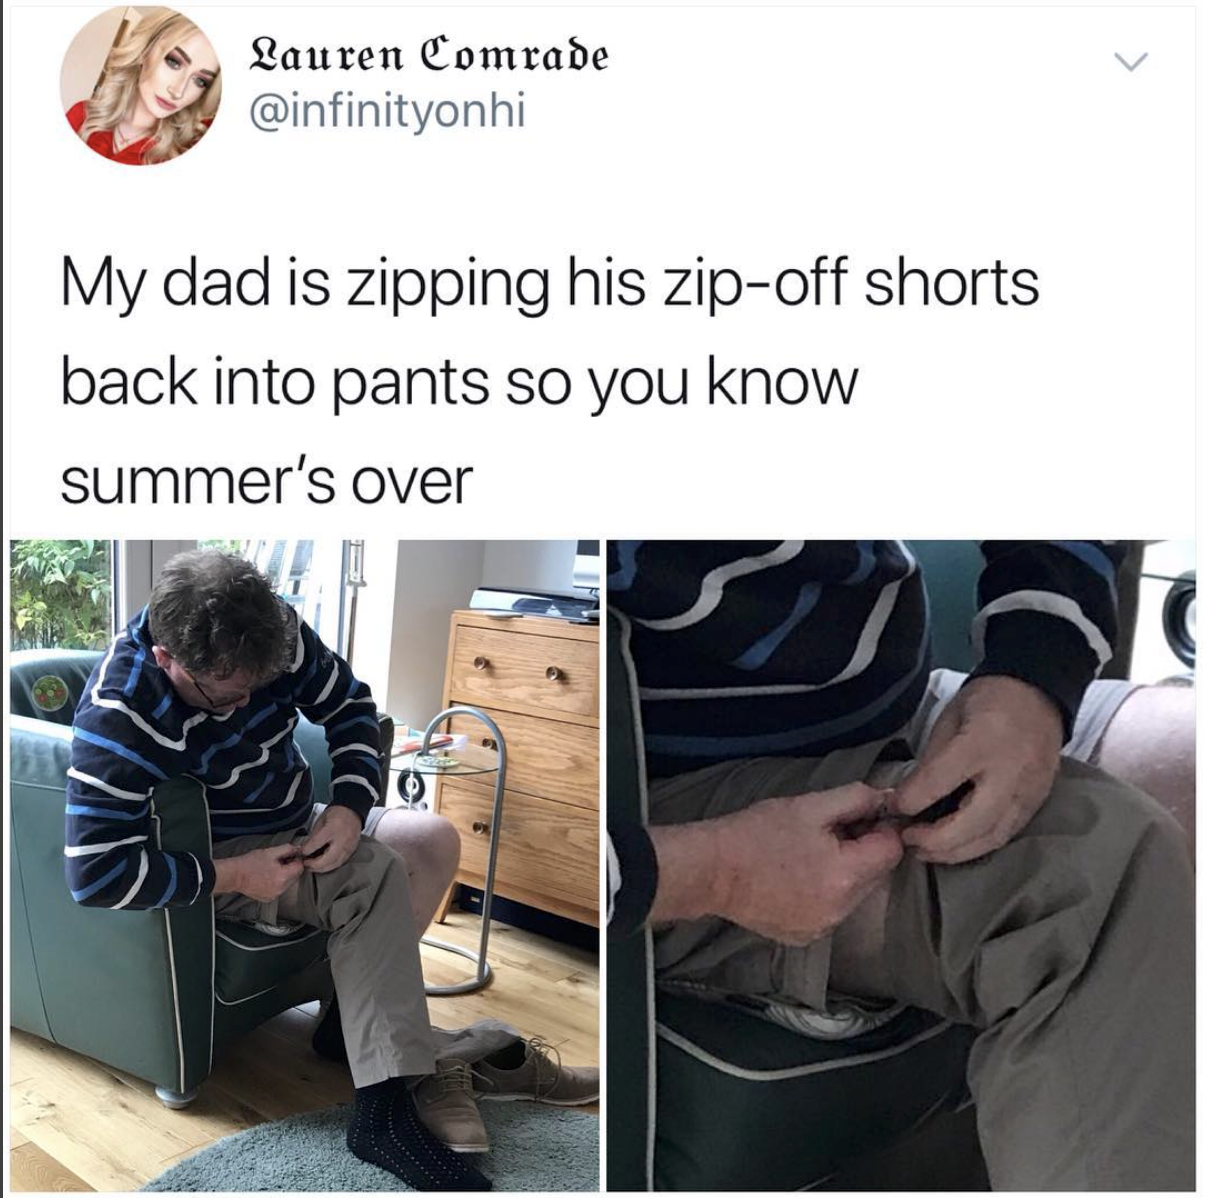 summer is over my dad - Lauren Comrade My dad is zipping his zipoff shorts back into pants so you know summer's over